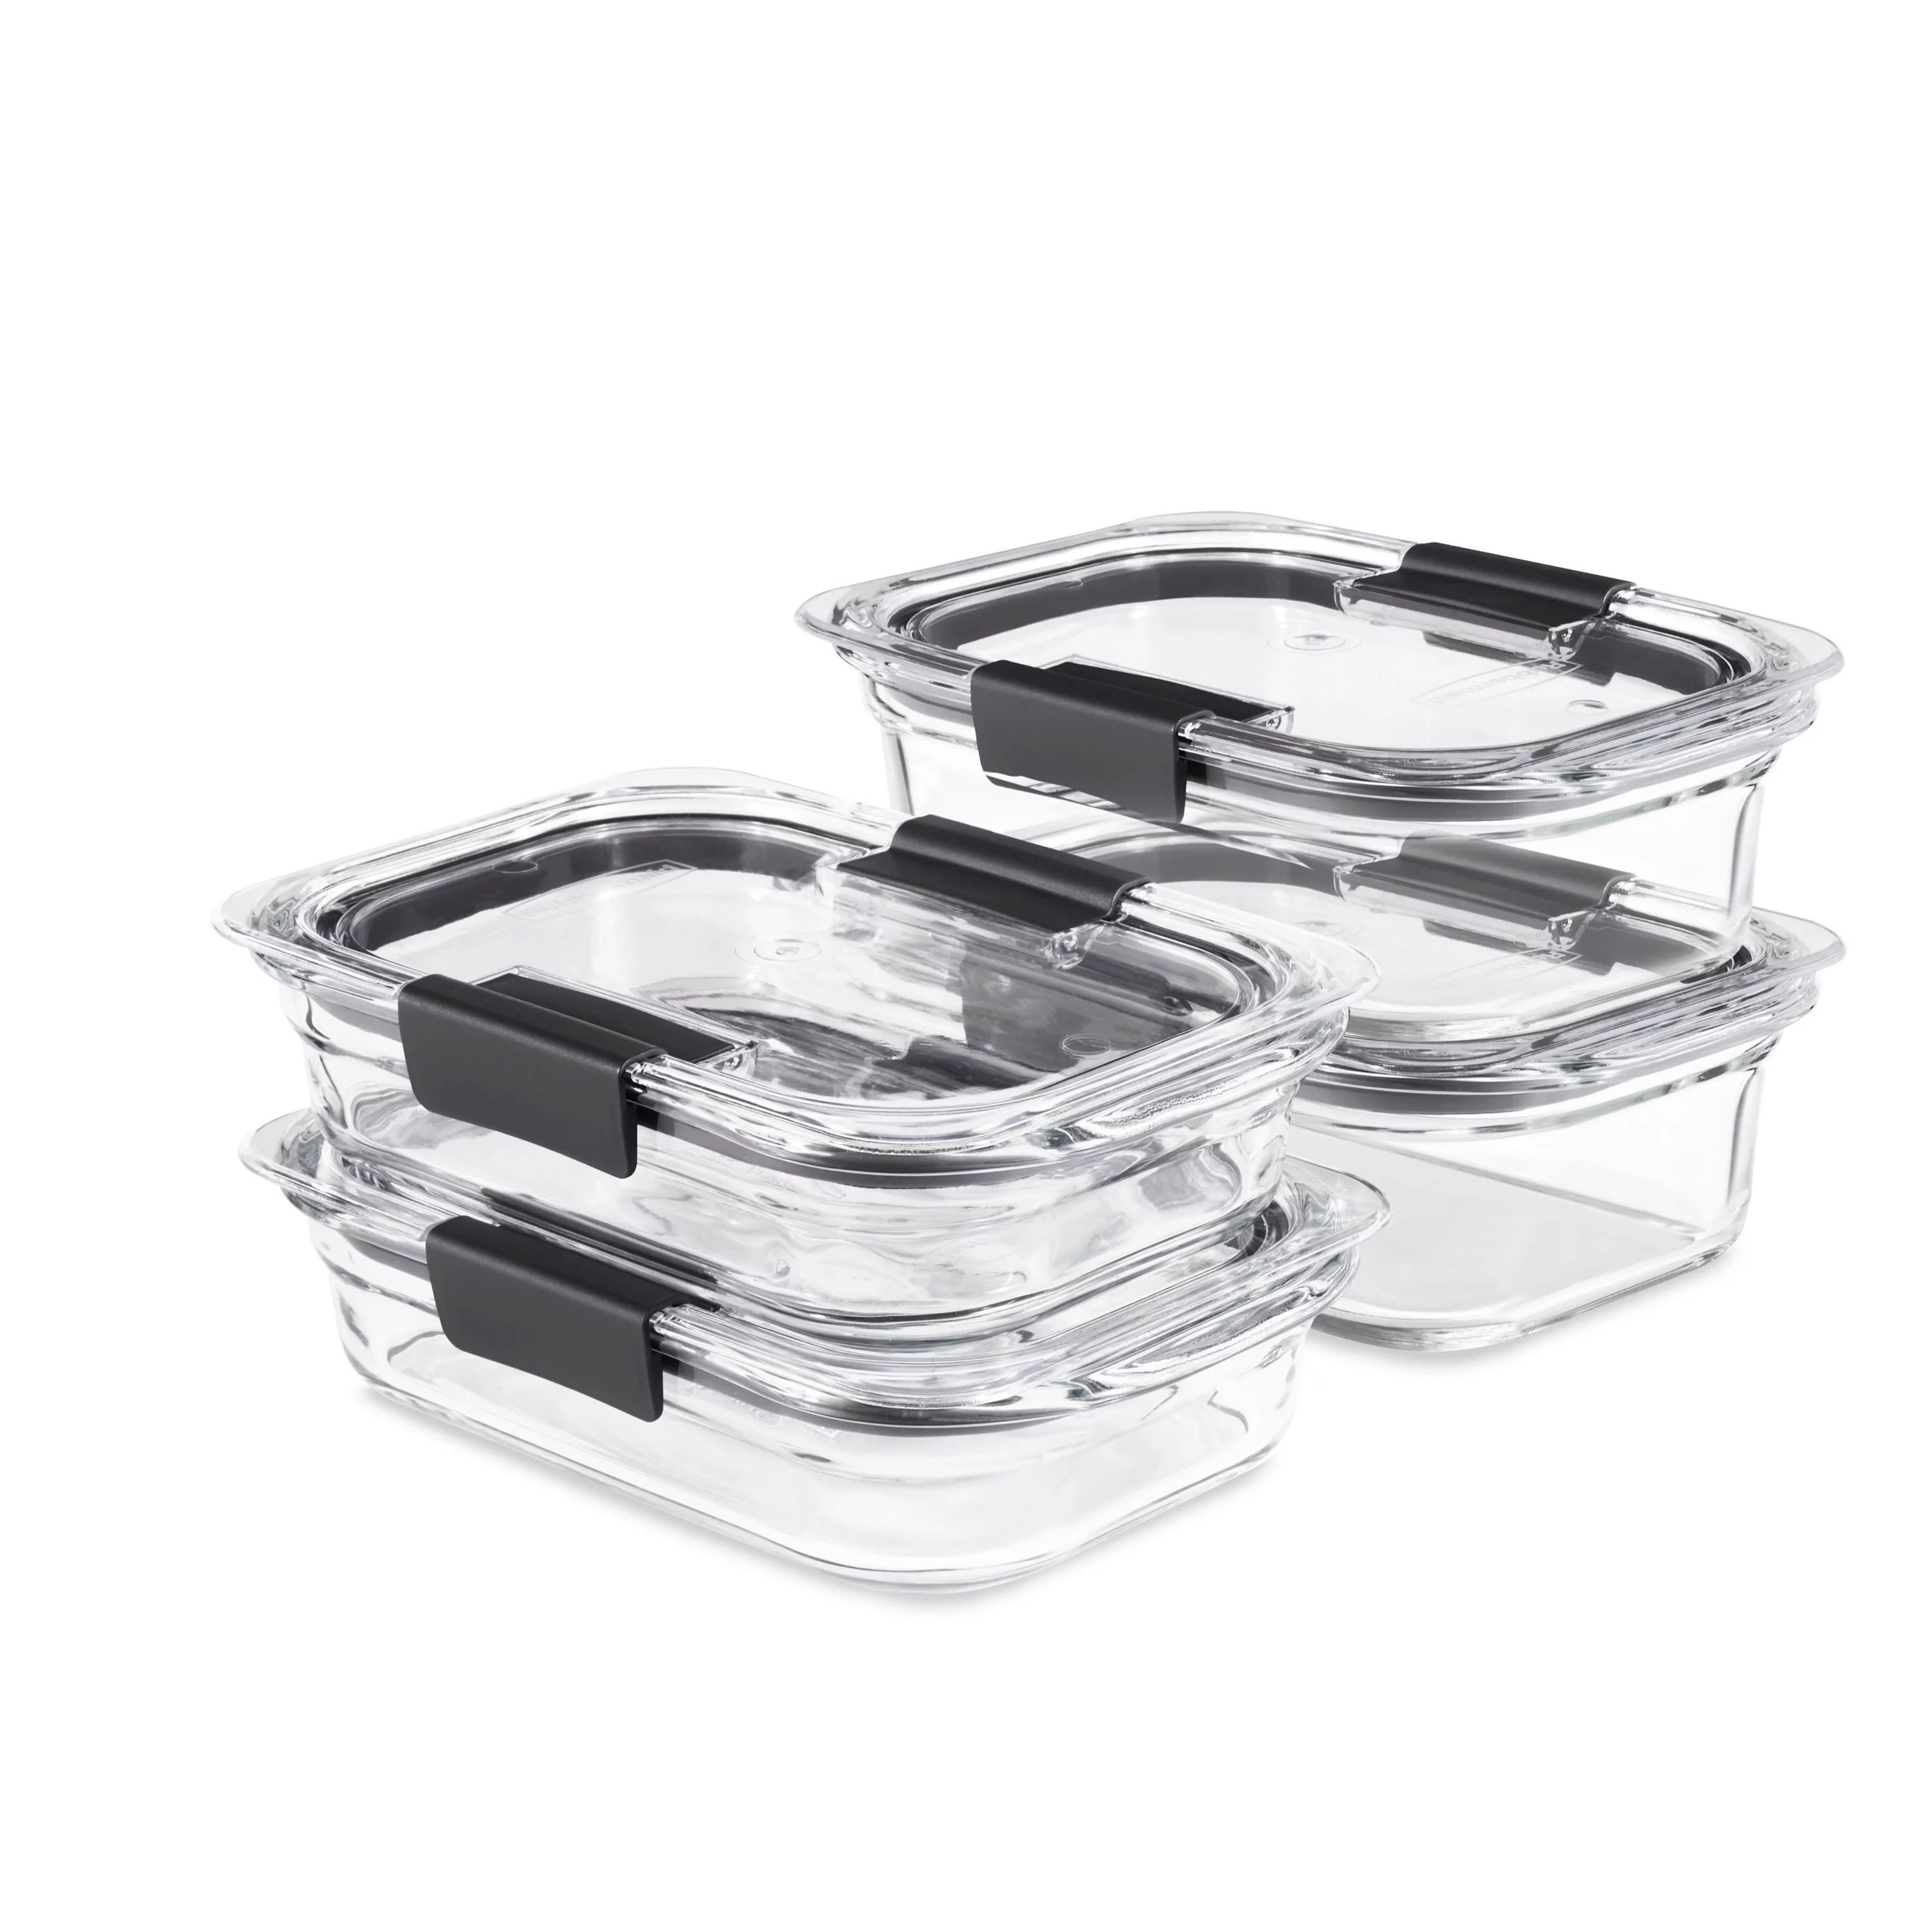 Rubbermaid Brilliance Glass Food Storage Containers, Set of 4 Food Containers with Lids (8 Pieces... | Walmart (US)